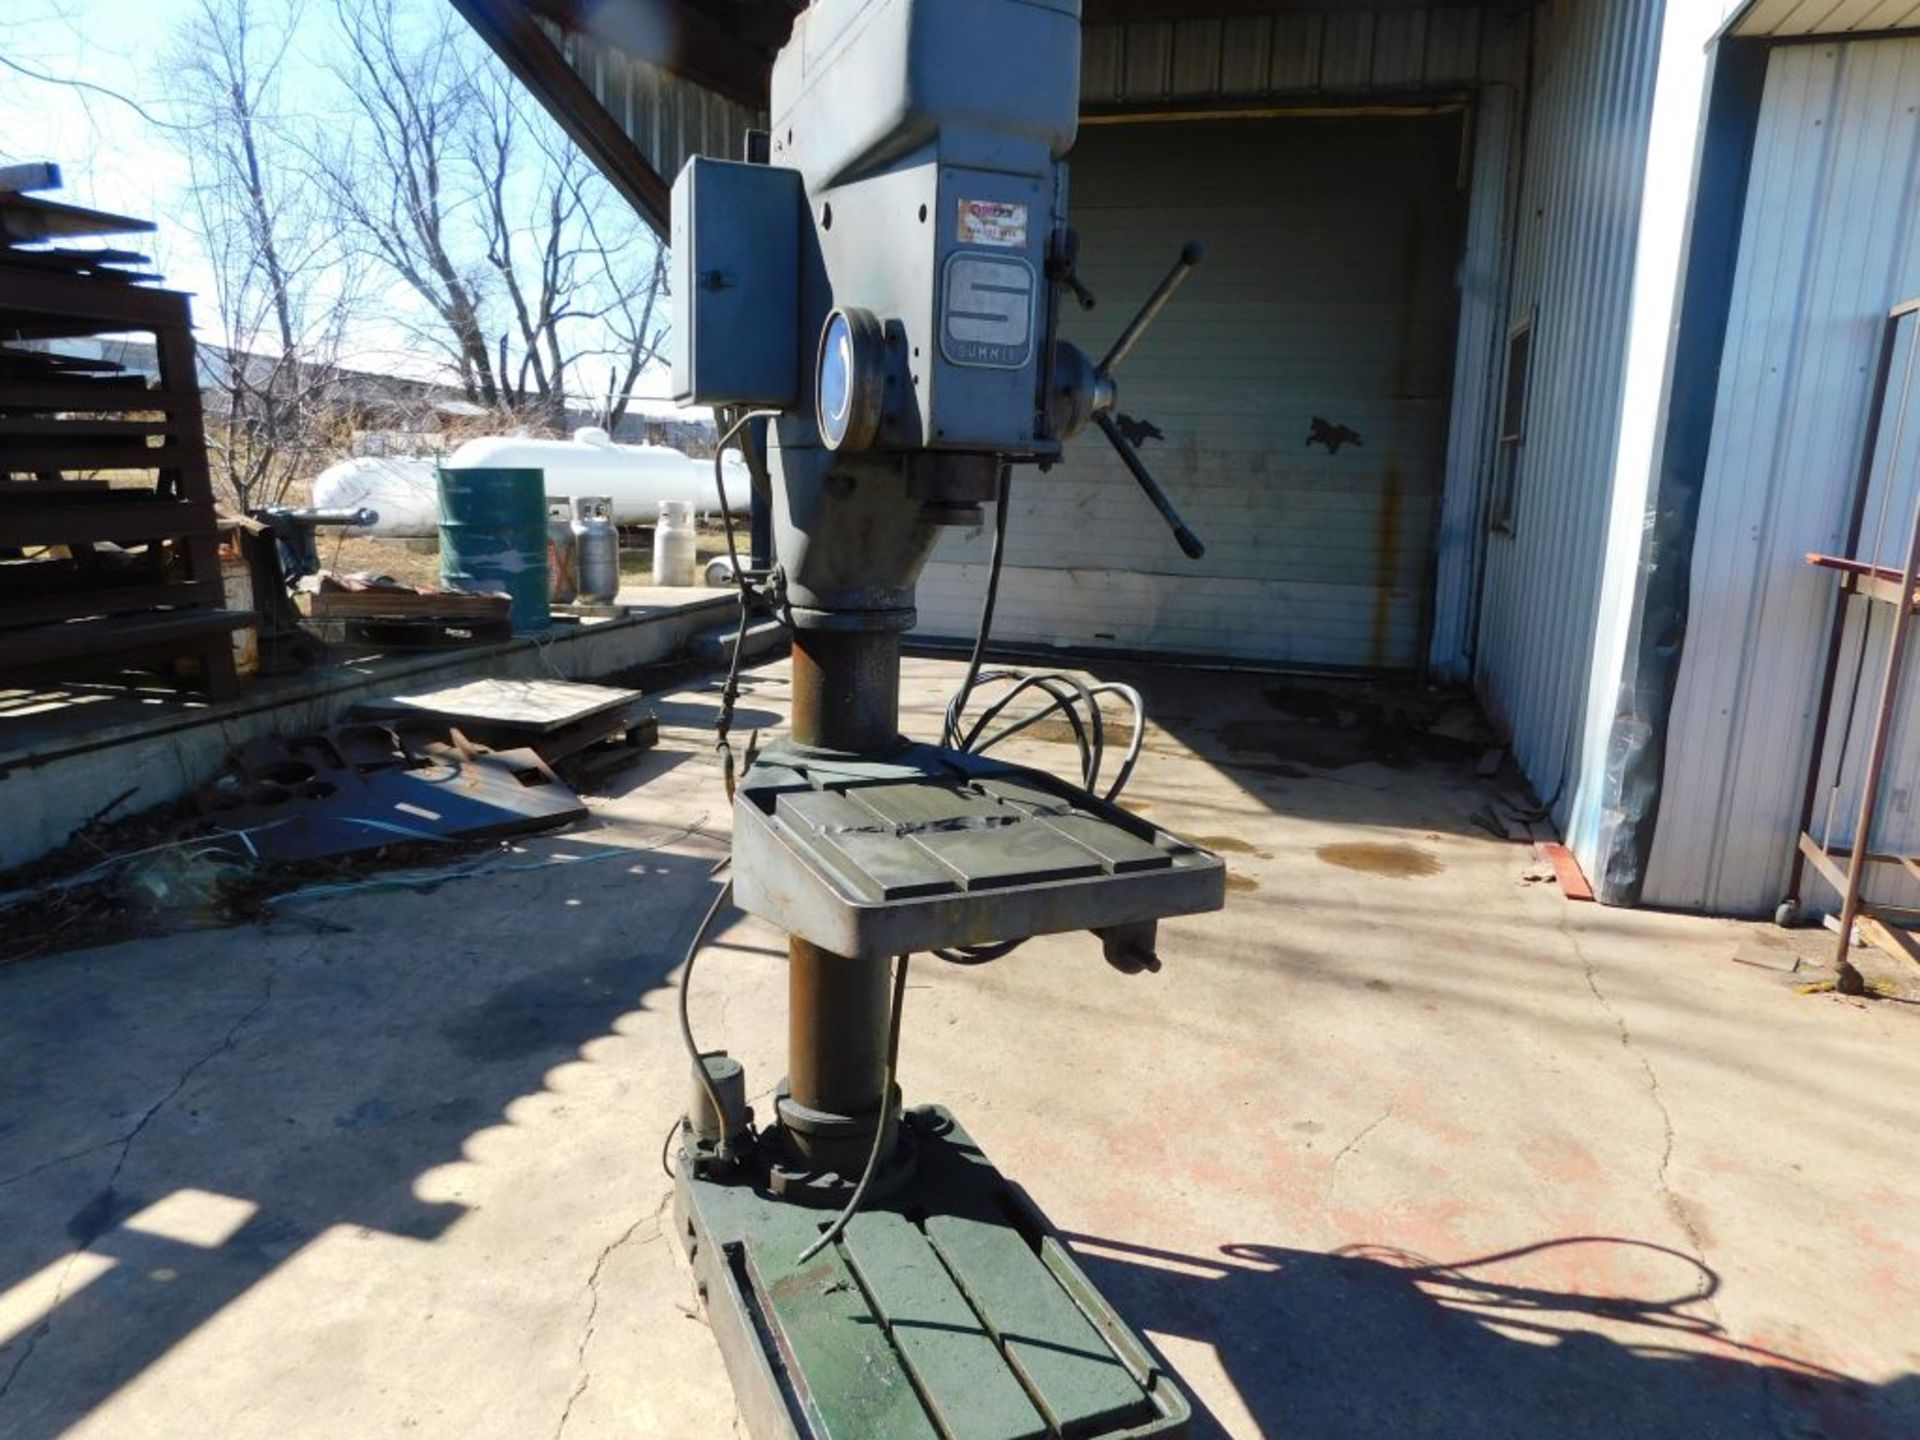 Summitt drill press, model 59R, sn 731206, 3 ph. (LOCATED AT and to be picked up at: 3341 Addison - Image 3 of 5